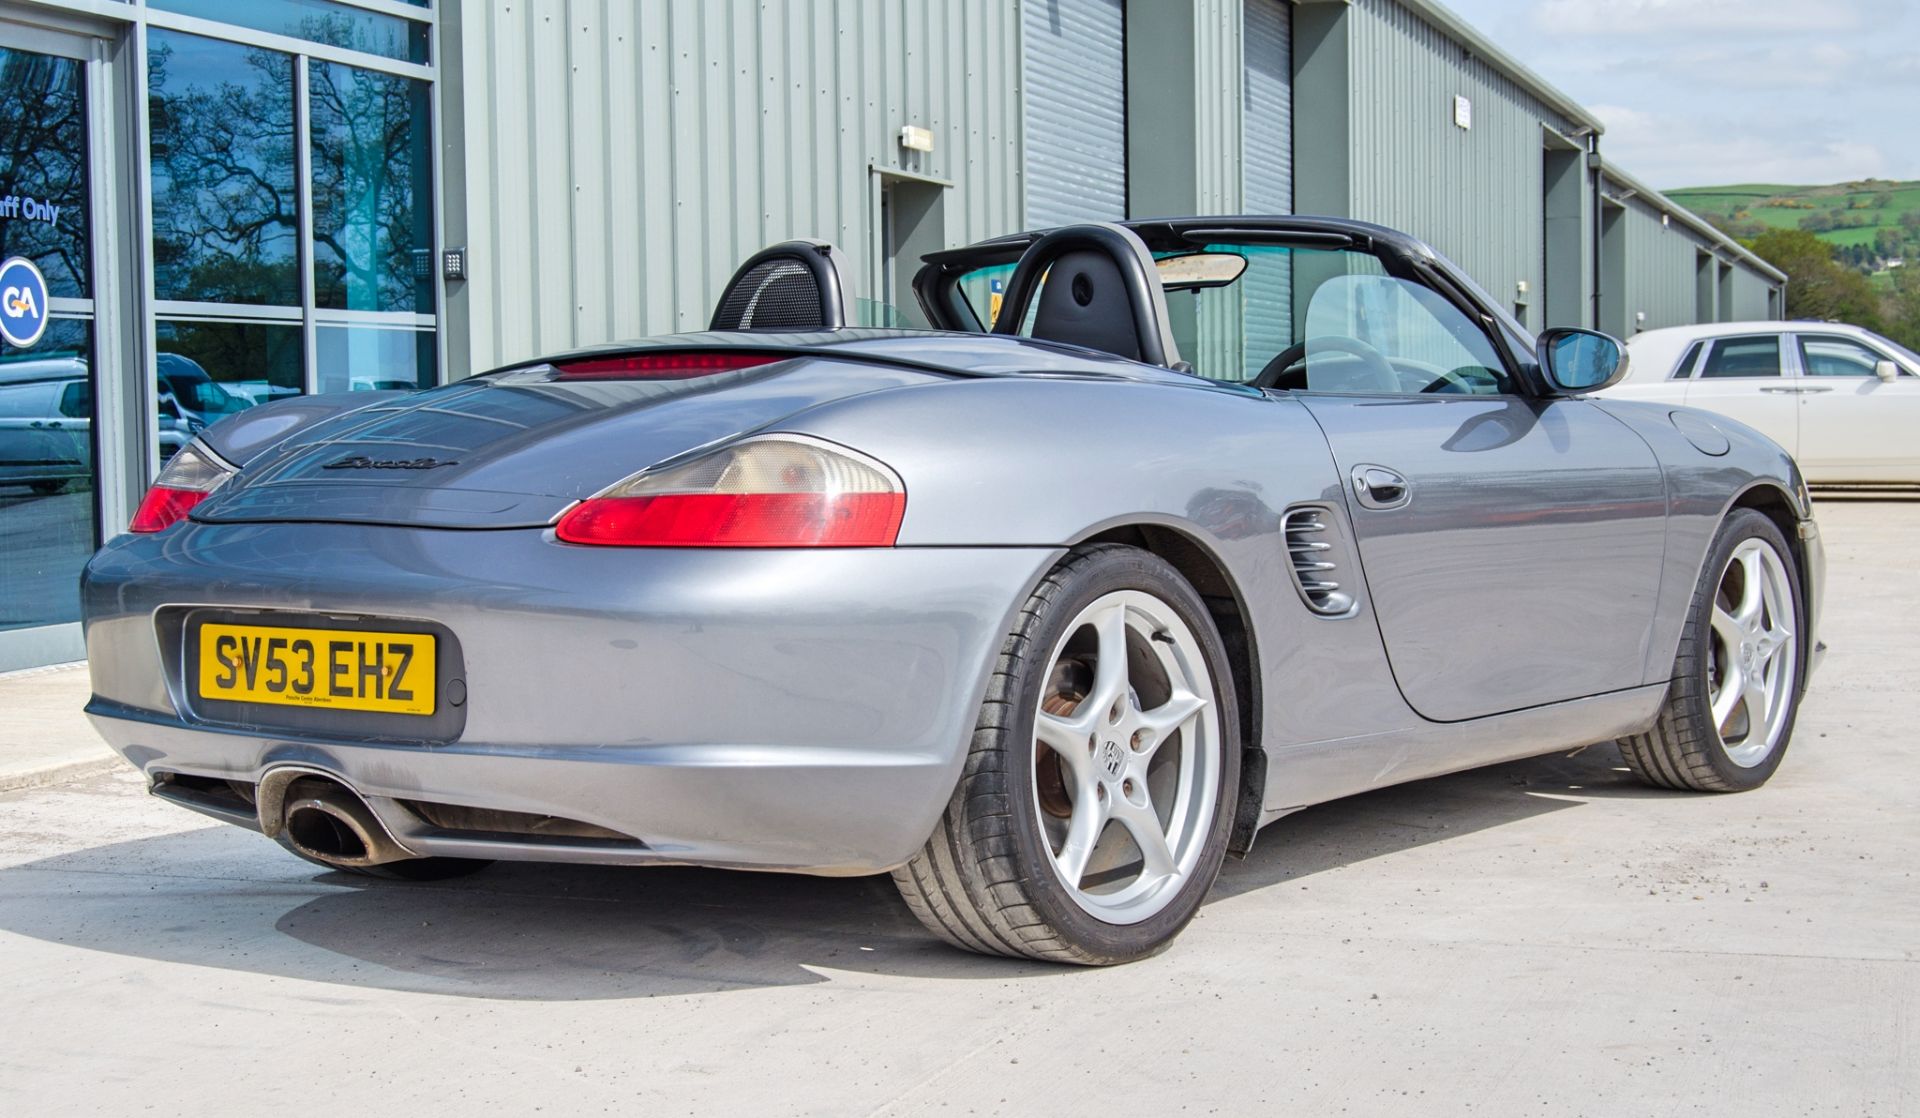 2003 Porsche Boxster 2.7 5 speed manual convertible roadster - Image 5 of 50